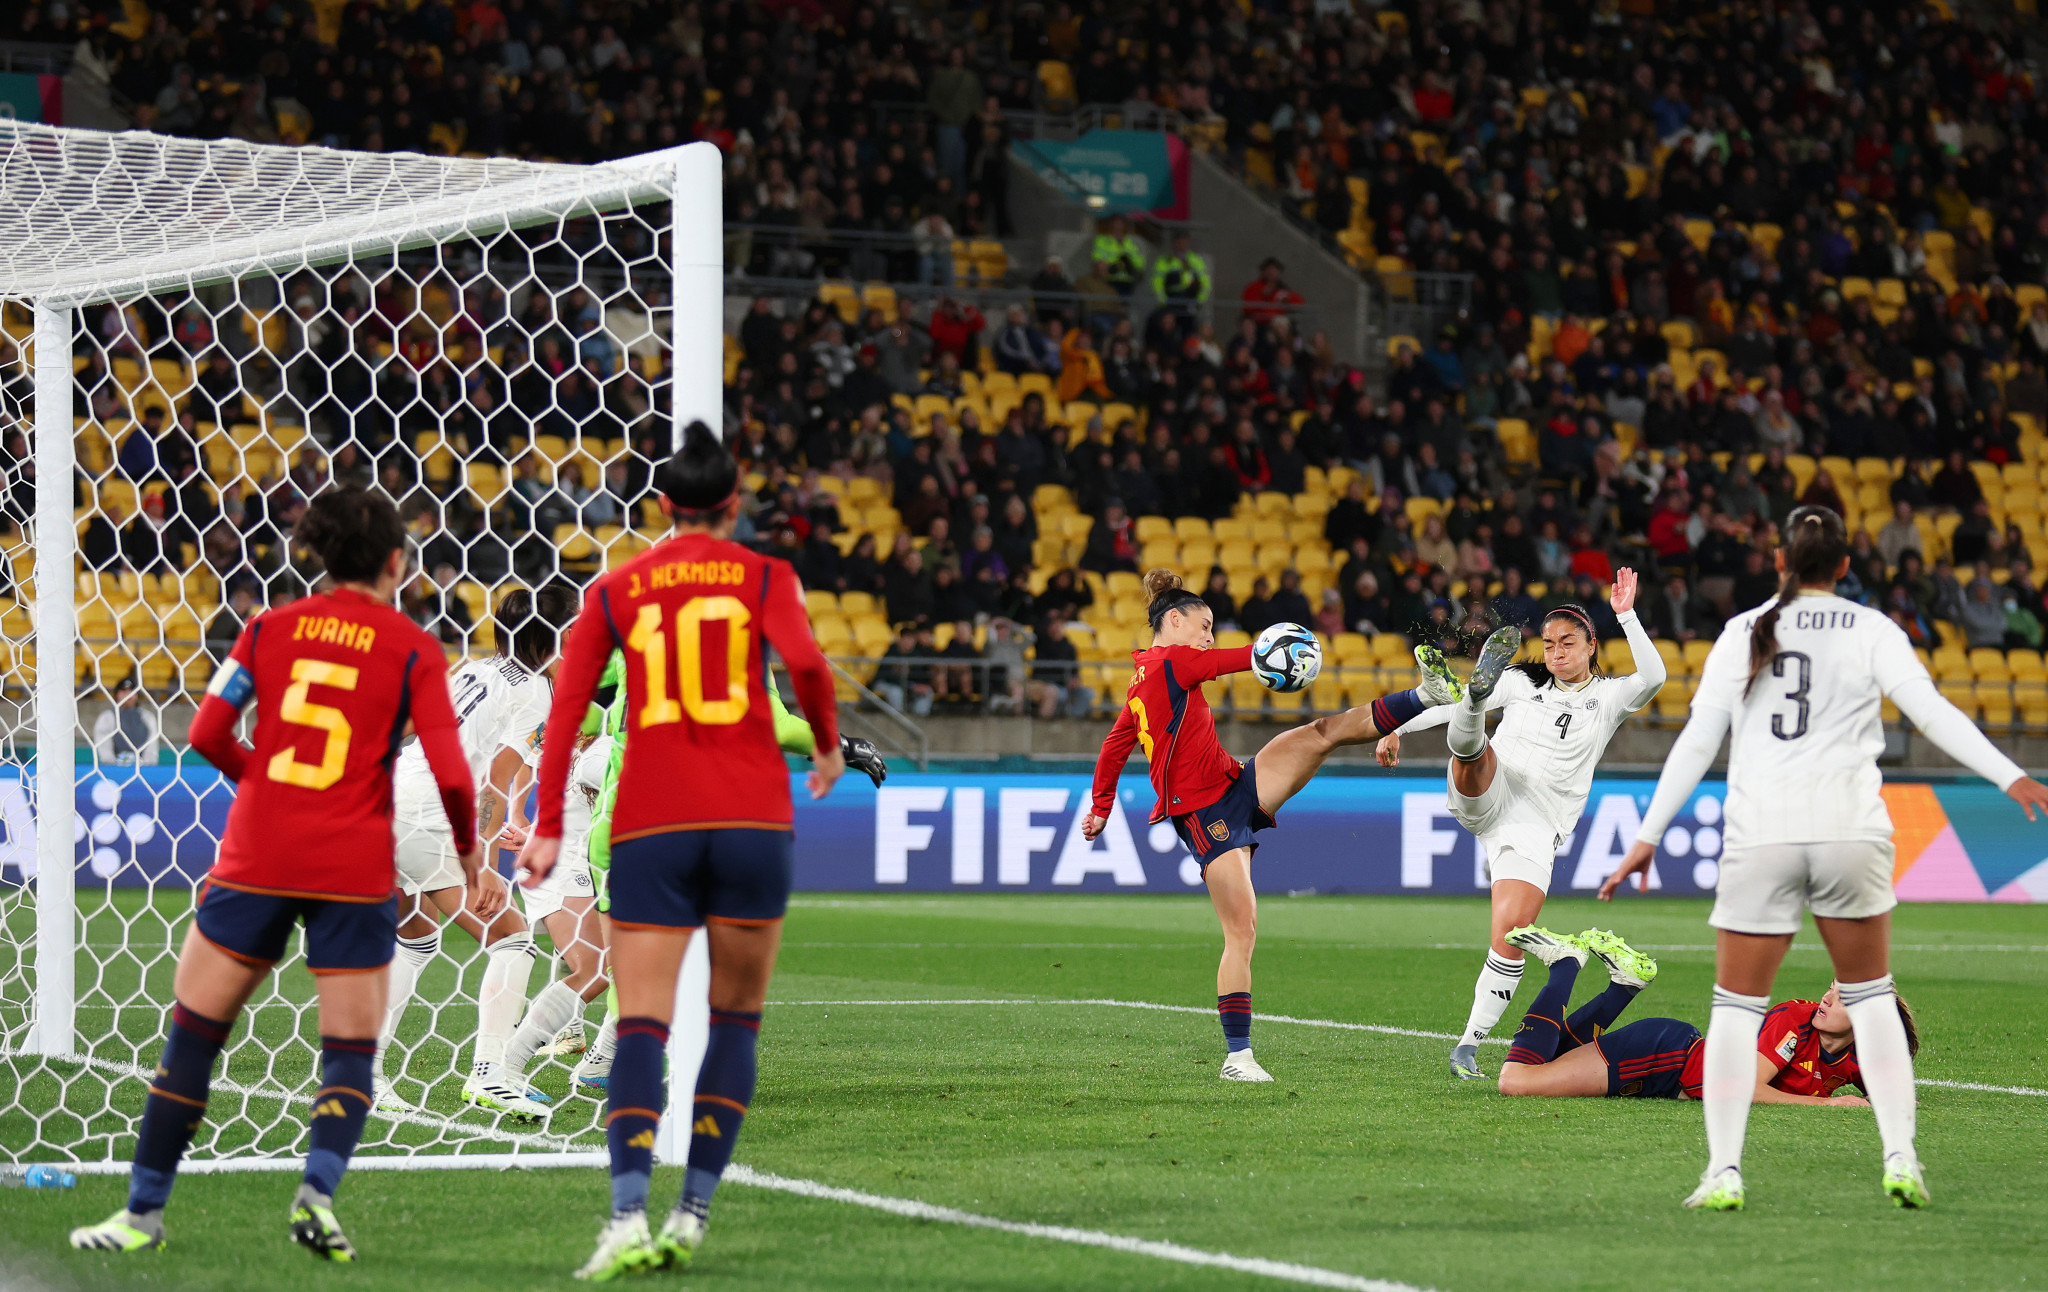 Esther González, centre in red, delivered the cross which led to an own goal for Spain's opener and scored their third goal of the game on the rebound ©Getty Images